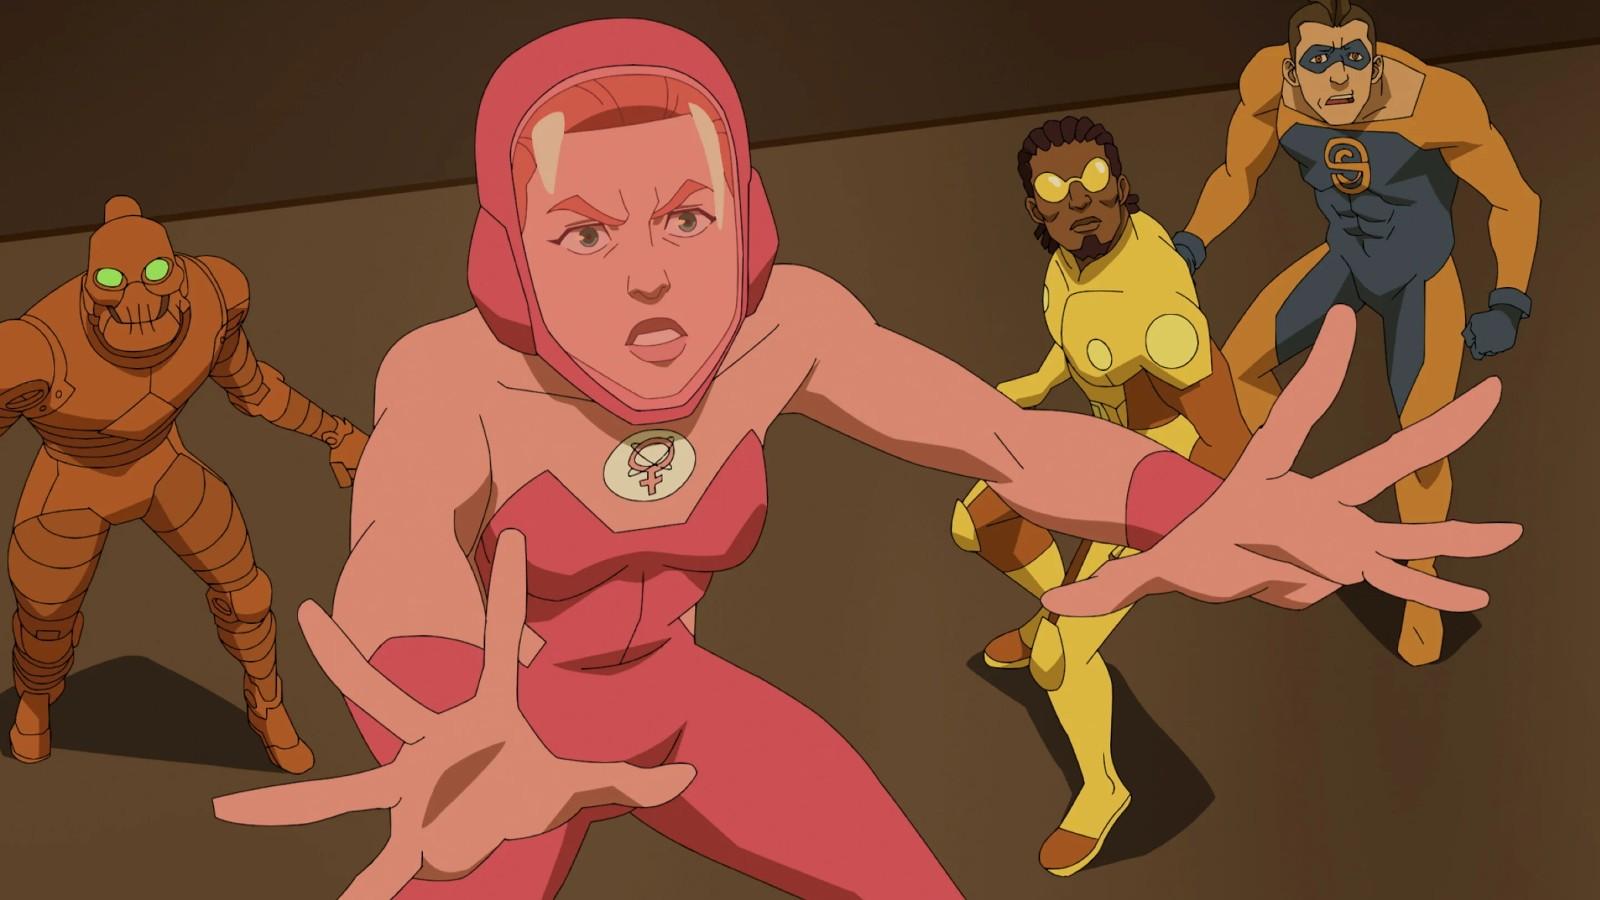 Atom Eve and others in Invincible Season 2